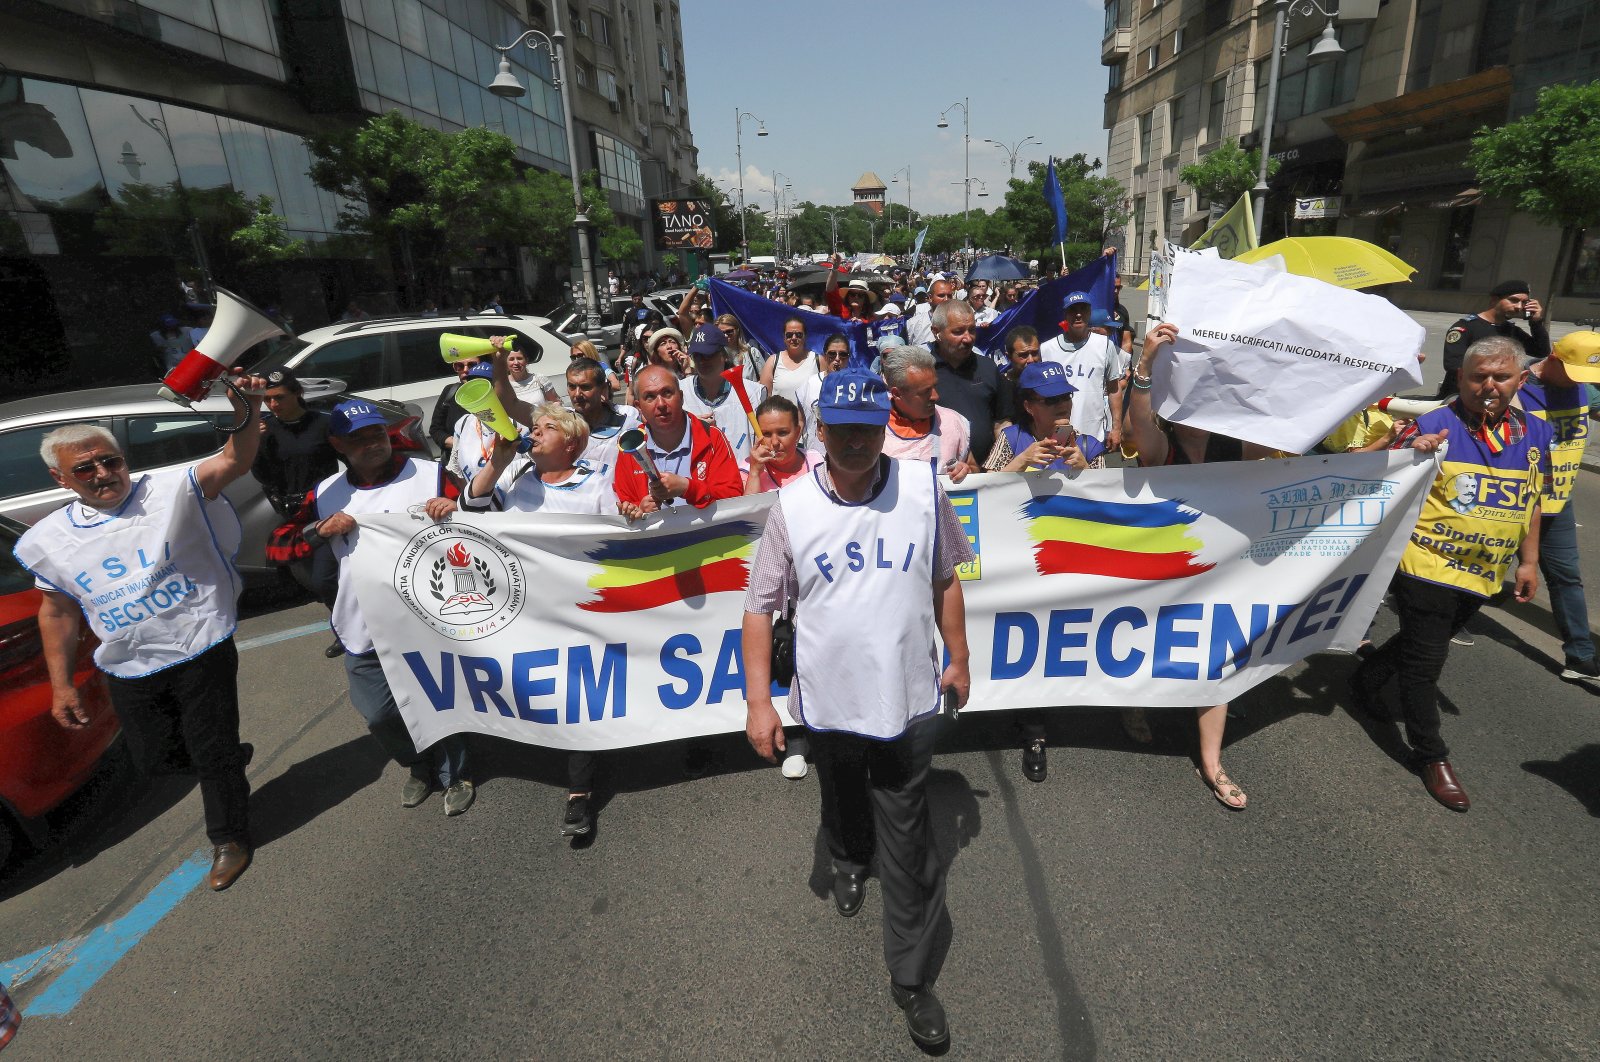 Romanian teachers carry banners and shout anti-government slogans during a trade union protest march in downtown Bucharest, Romania, May 25, 2023. (EPA Photo)